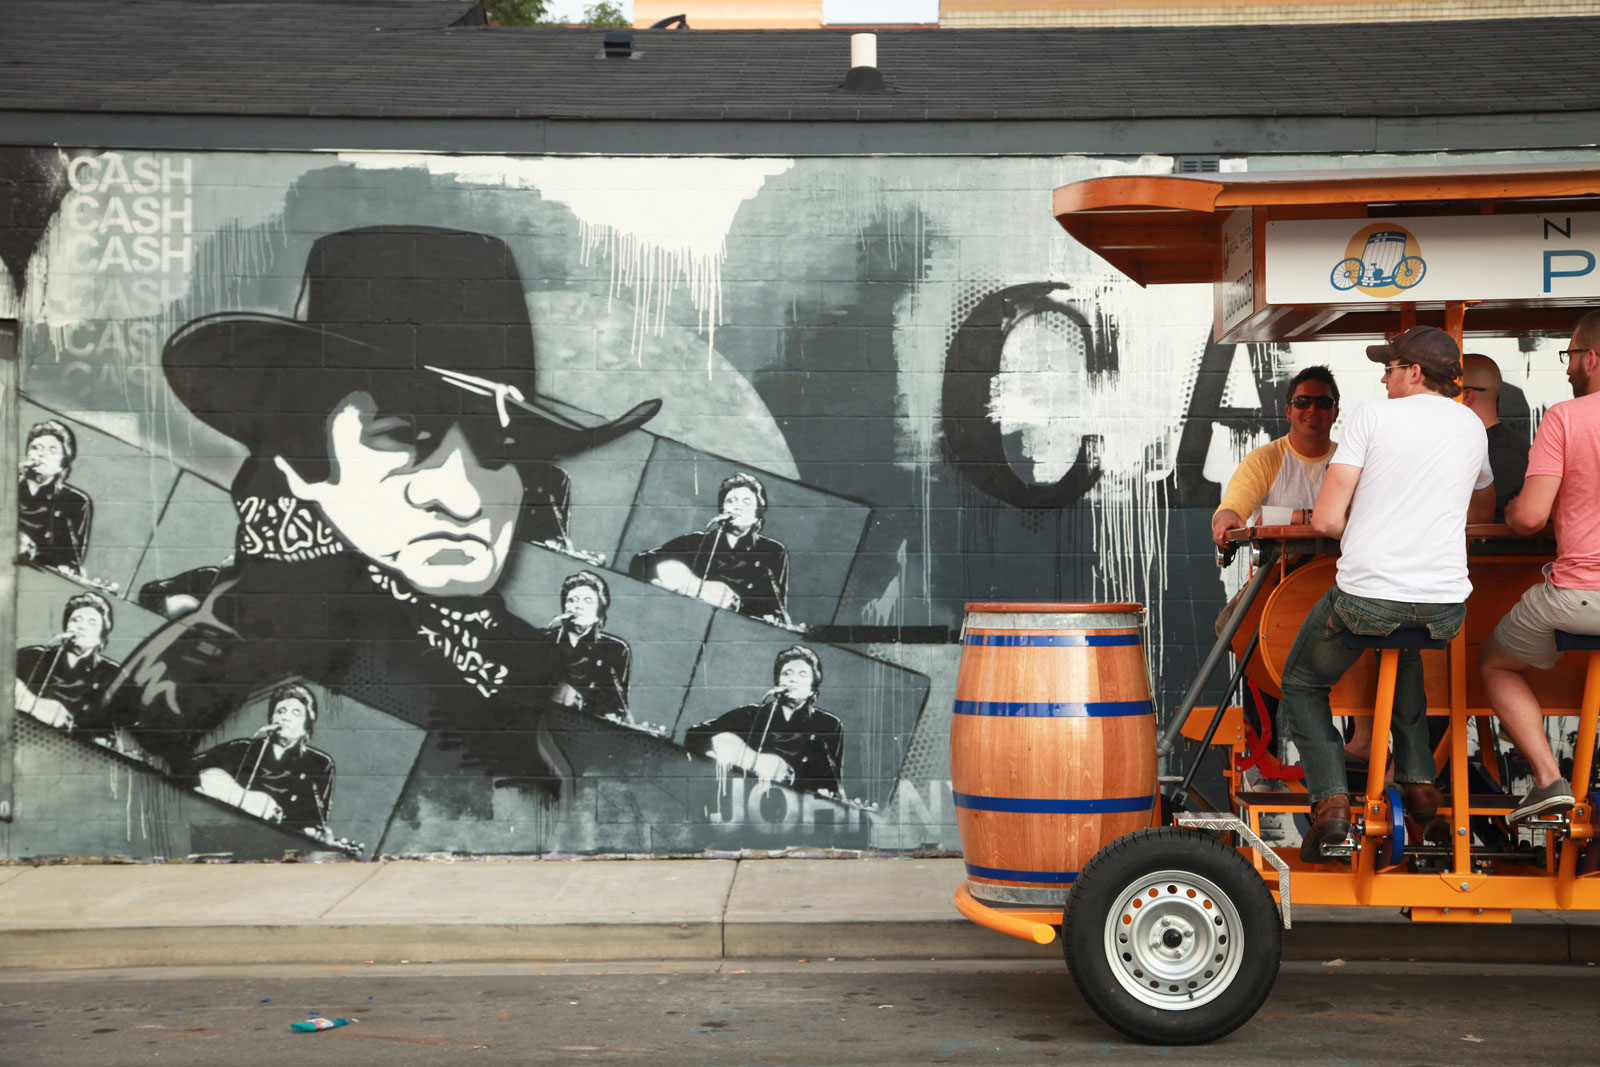 Photo of a Pedal Tavern boat in the foreground, with a Johnny Cash mural in the background.